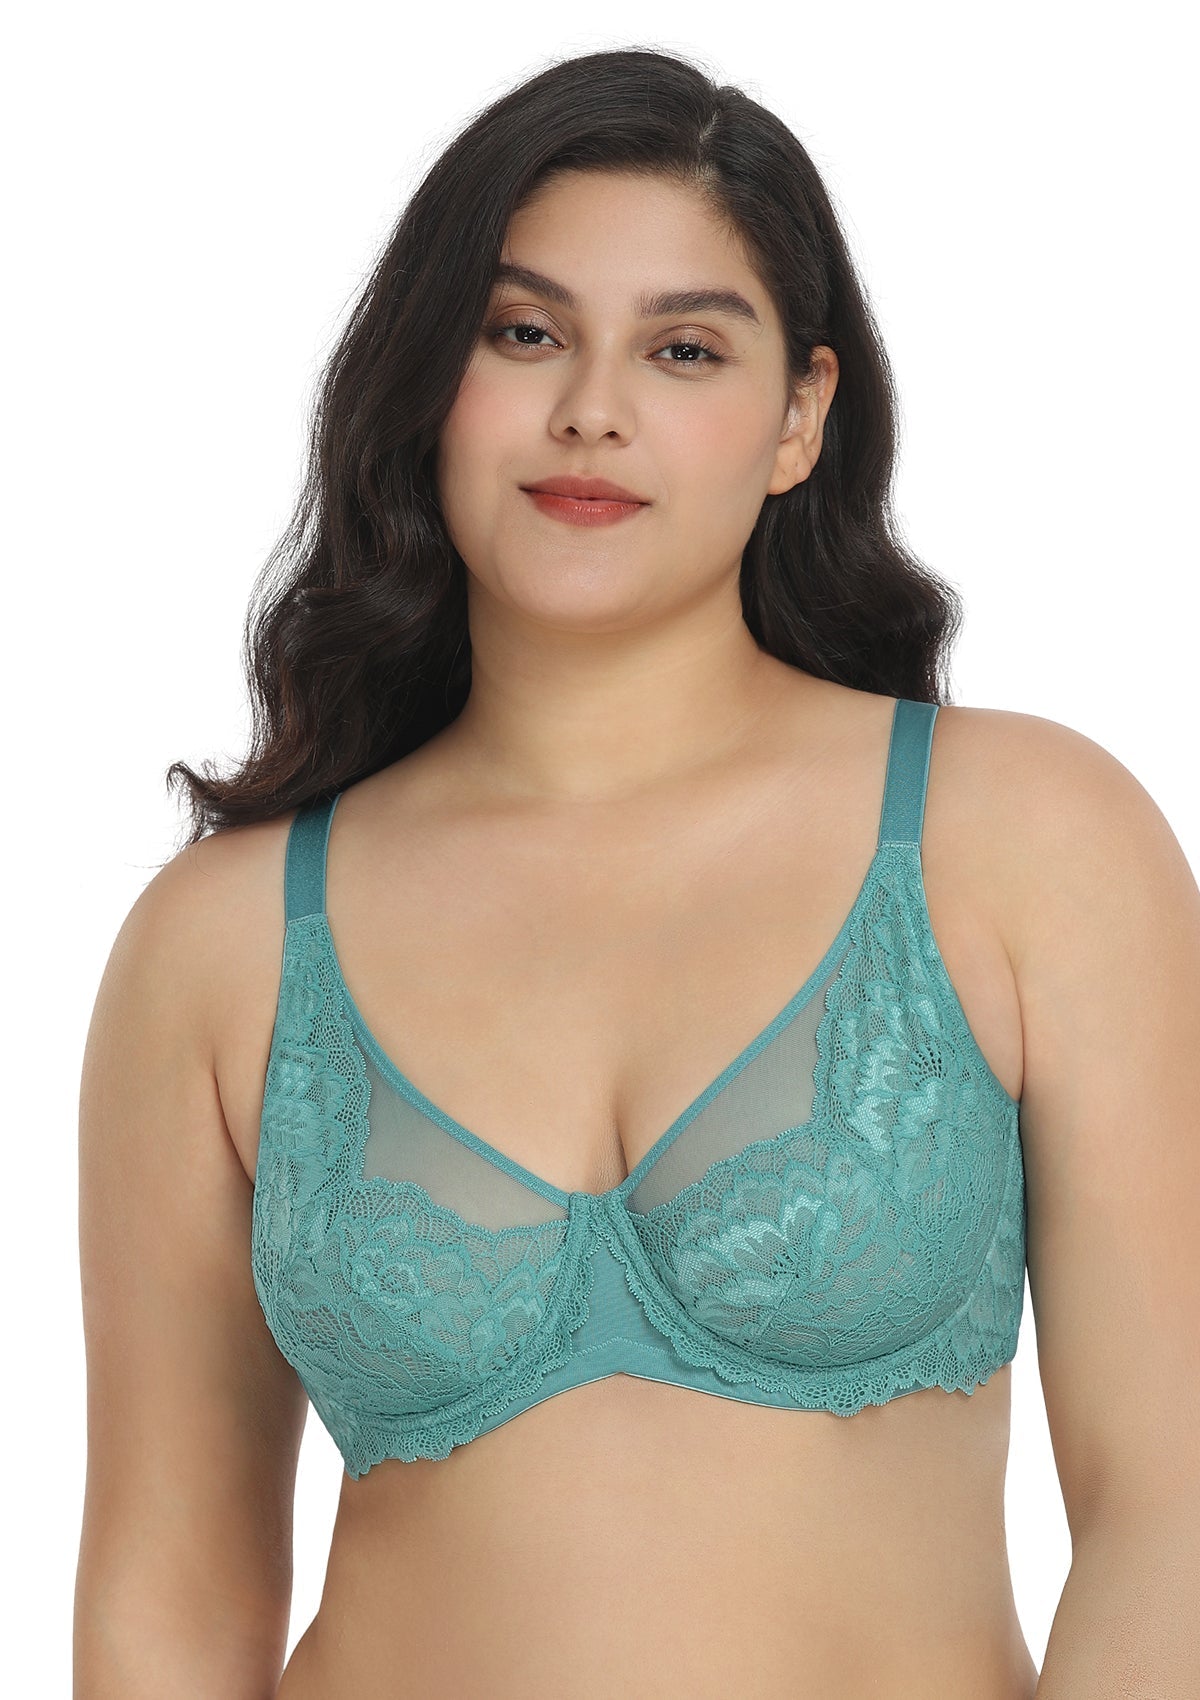 HSIA Paeonia Lace Full Coverage Underwire Non-Padded Uplifting Bra - Purple / 40 / D